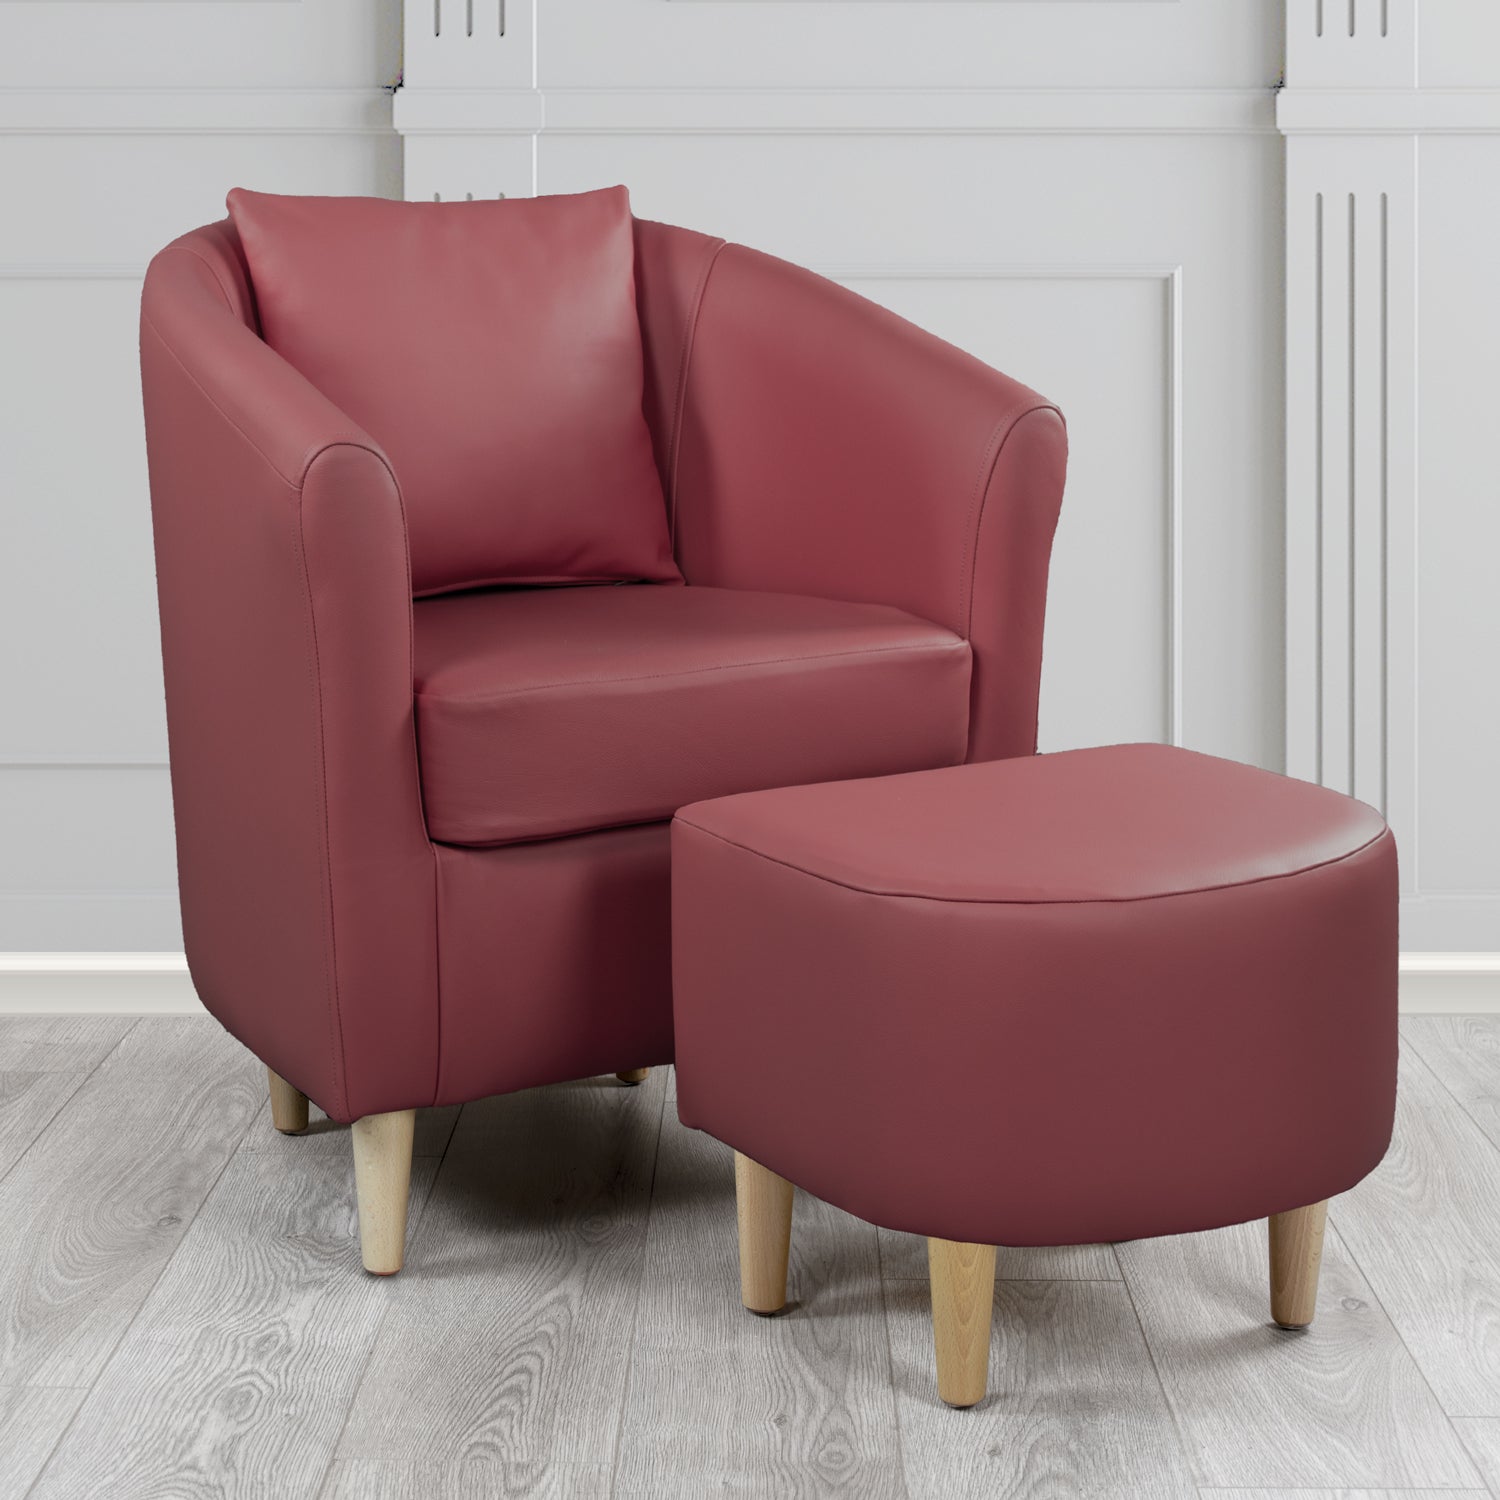 St Tropez Shelly Dark Grape Crib 5 Genuine Leather Tub Chair & Footstool Set With Scatter Cushion (6619475017770)